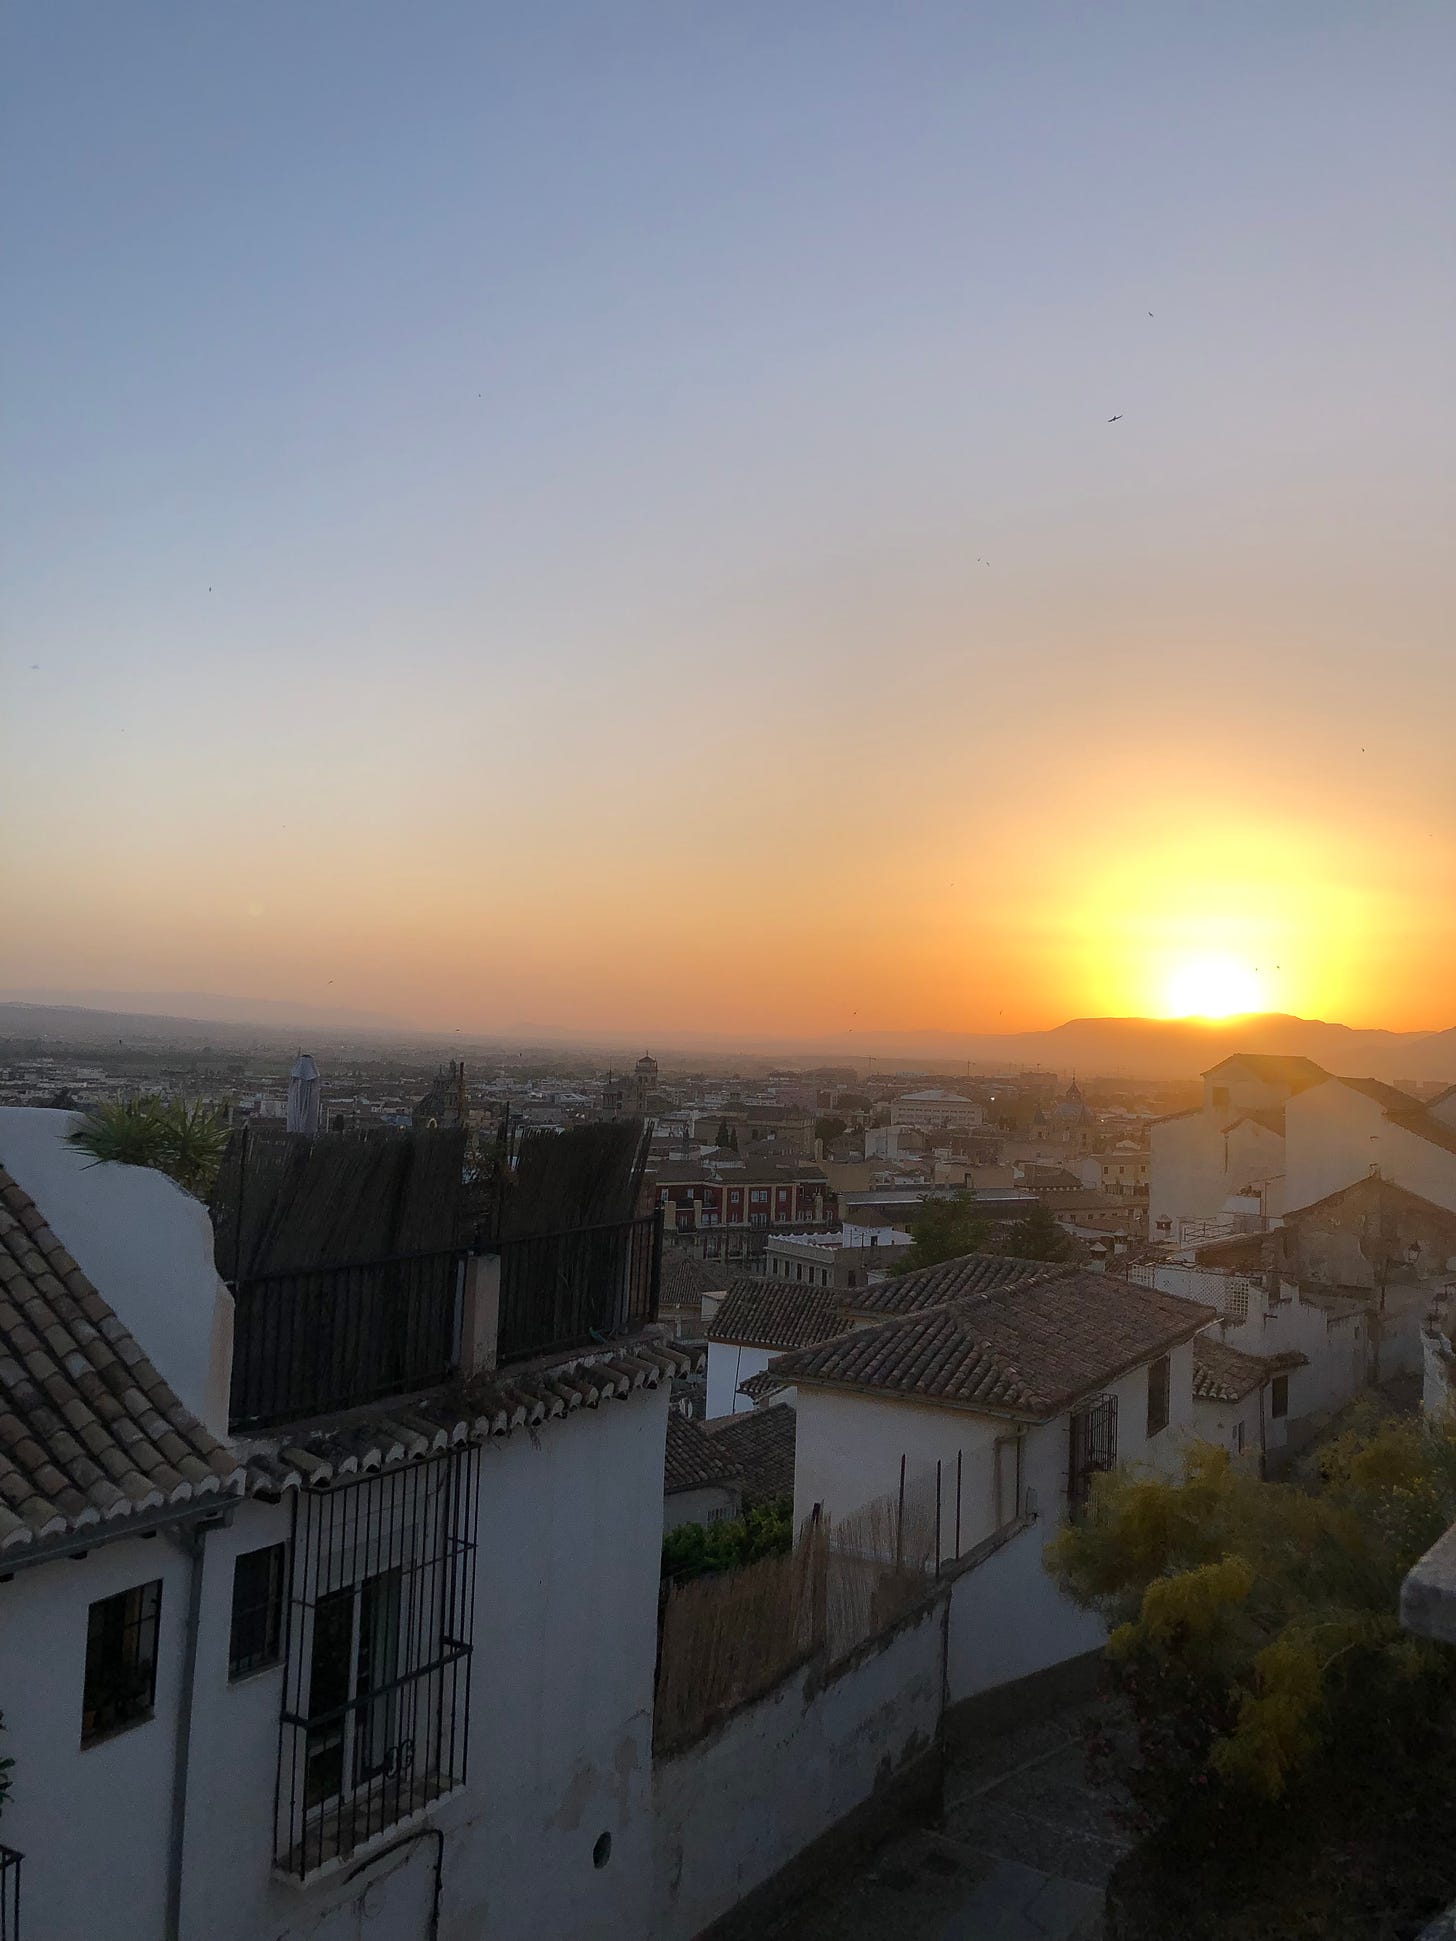 A picture of a sunset over the city of Granada, Spain